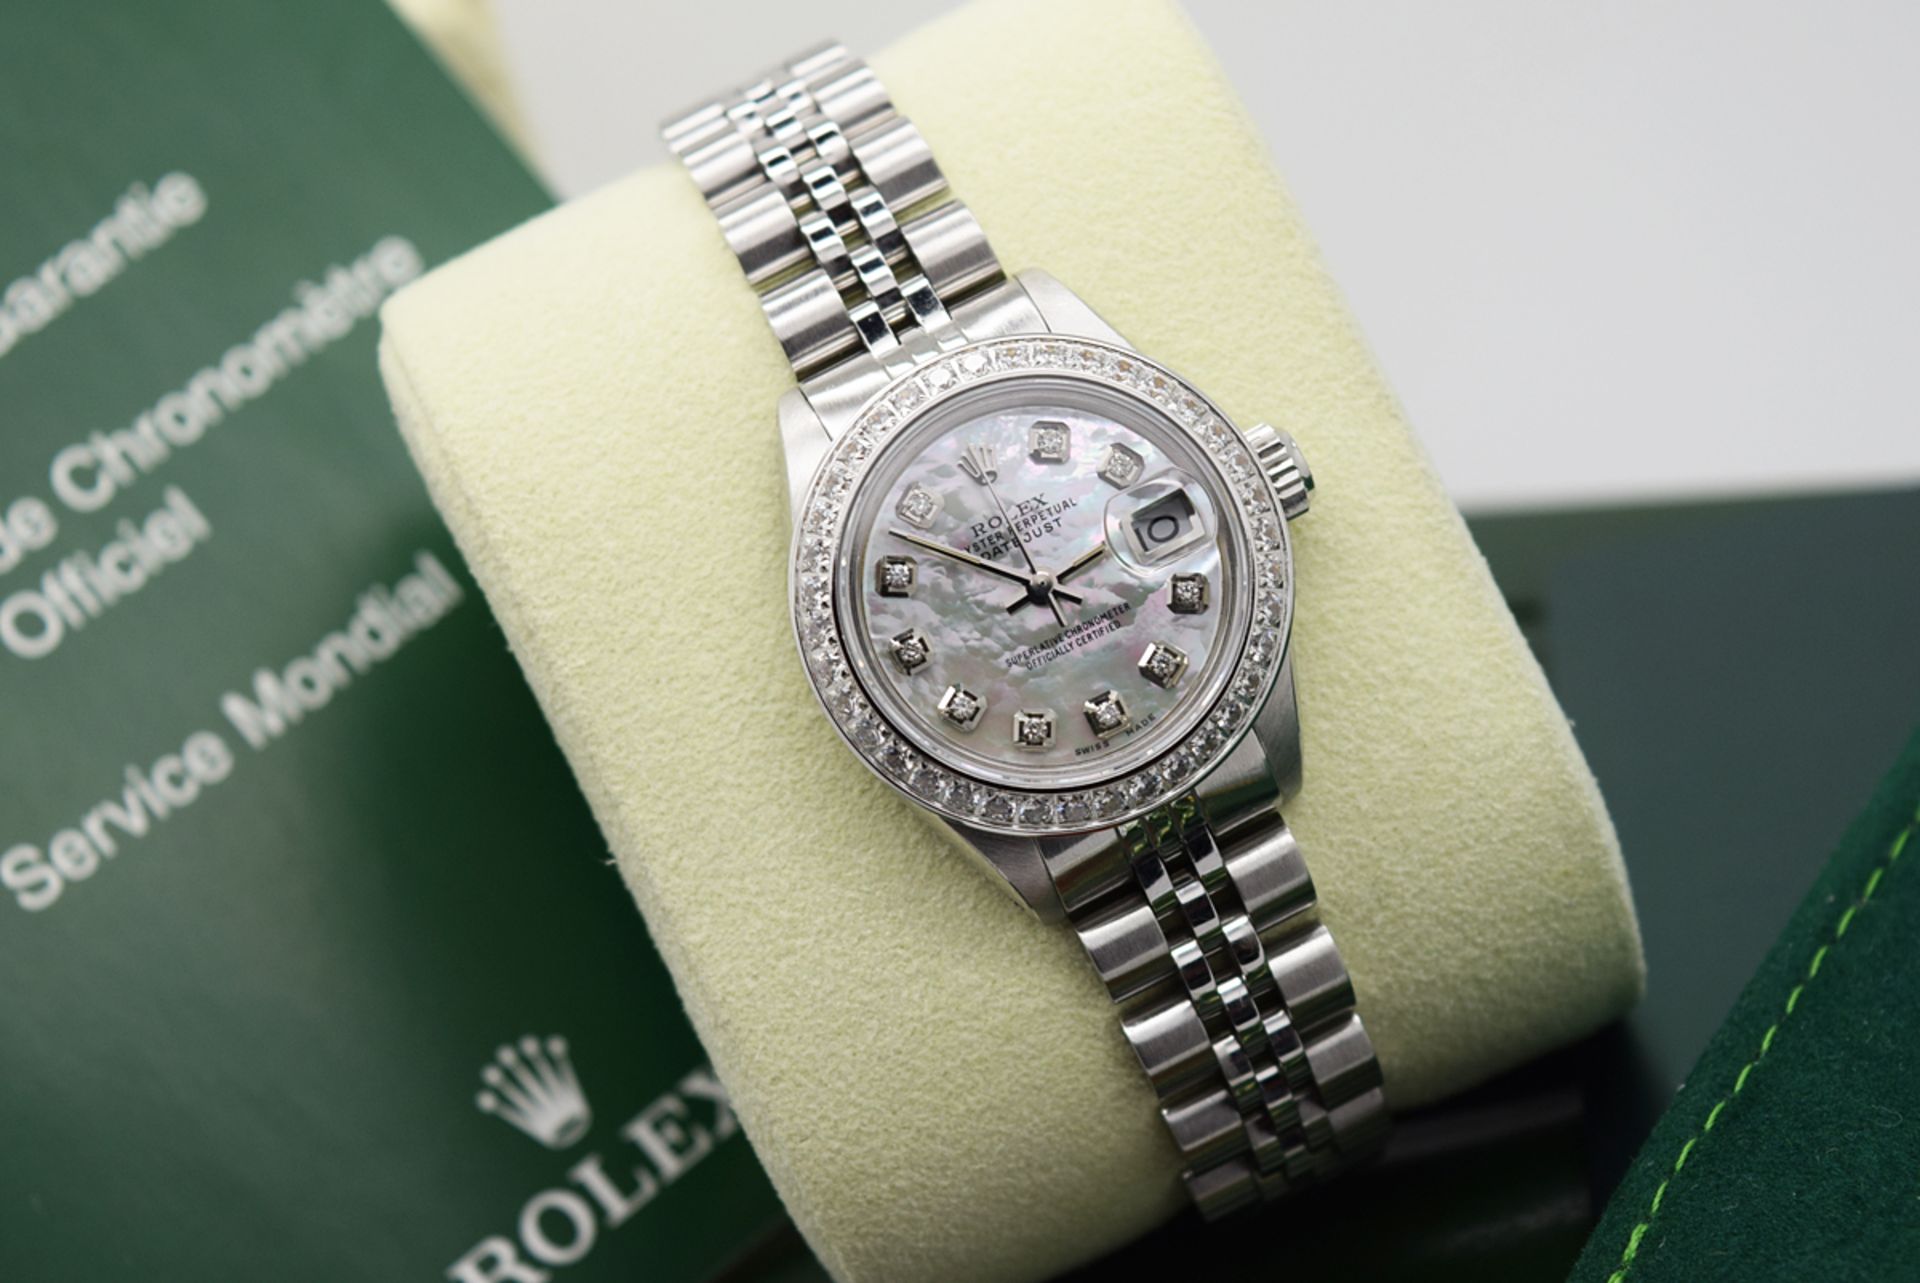 *STUNNING* ROLEX LADY DATEJUST - STAINLESS STEEL, DIAMOND MOP DIAL - Image 8 of 10